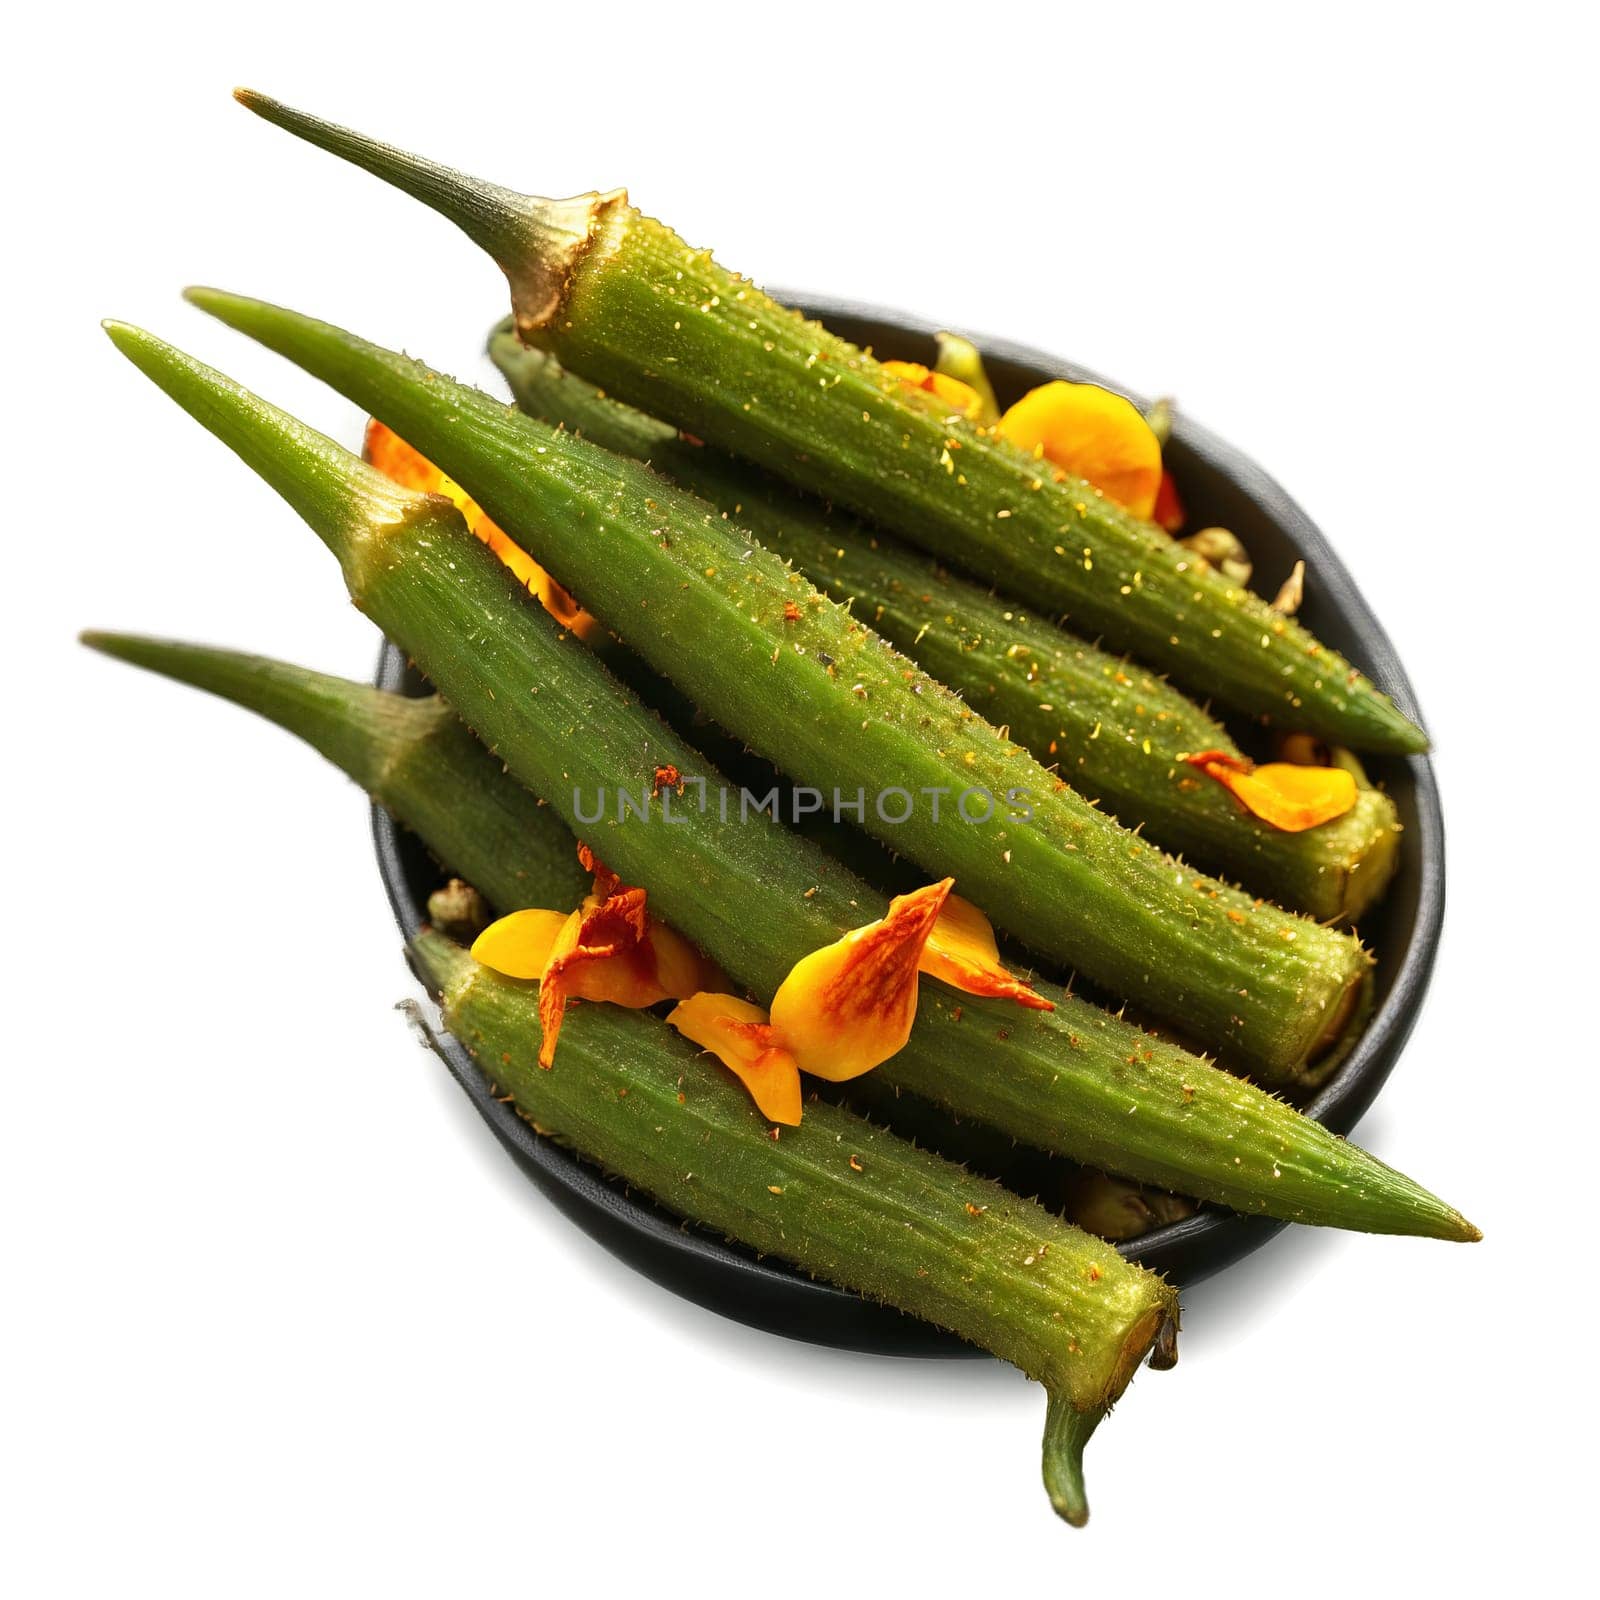 Garlic roasted okra crispy olive oil smoked paprika vibrant green served in a bowl Culinary by panophotograph